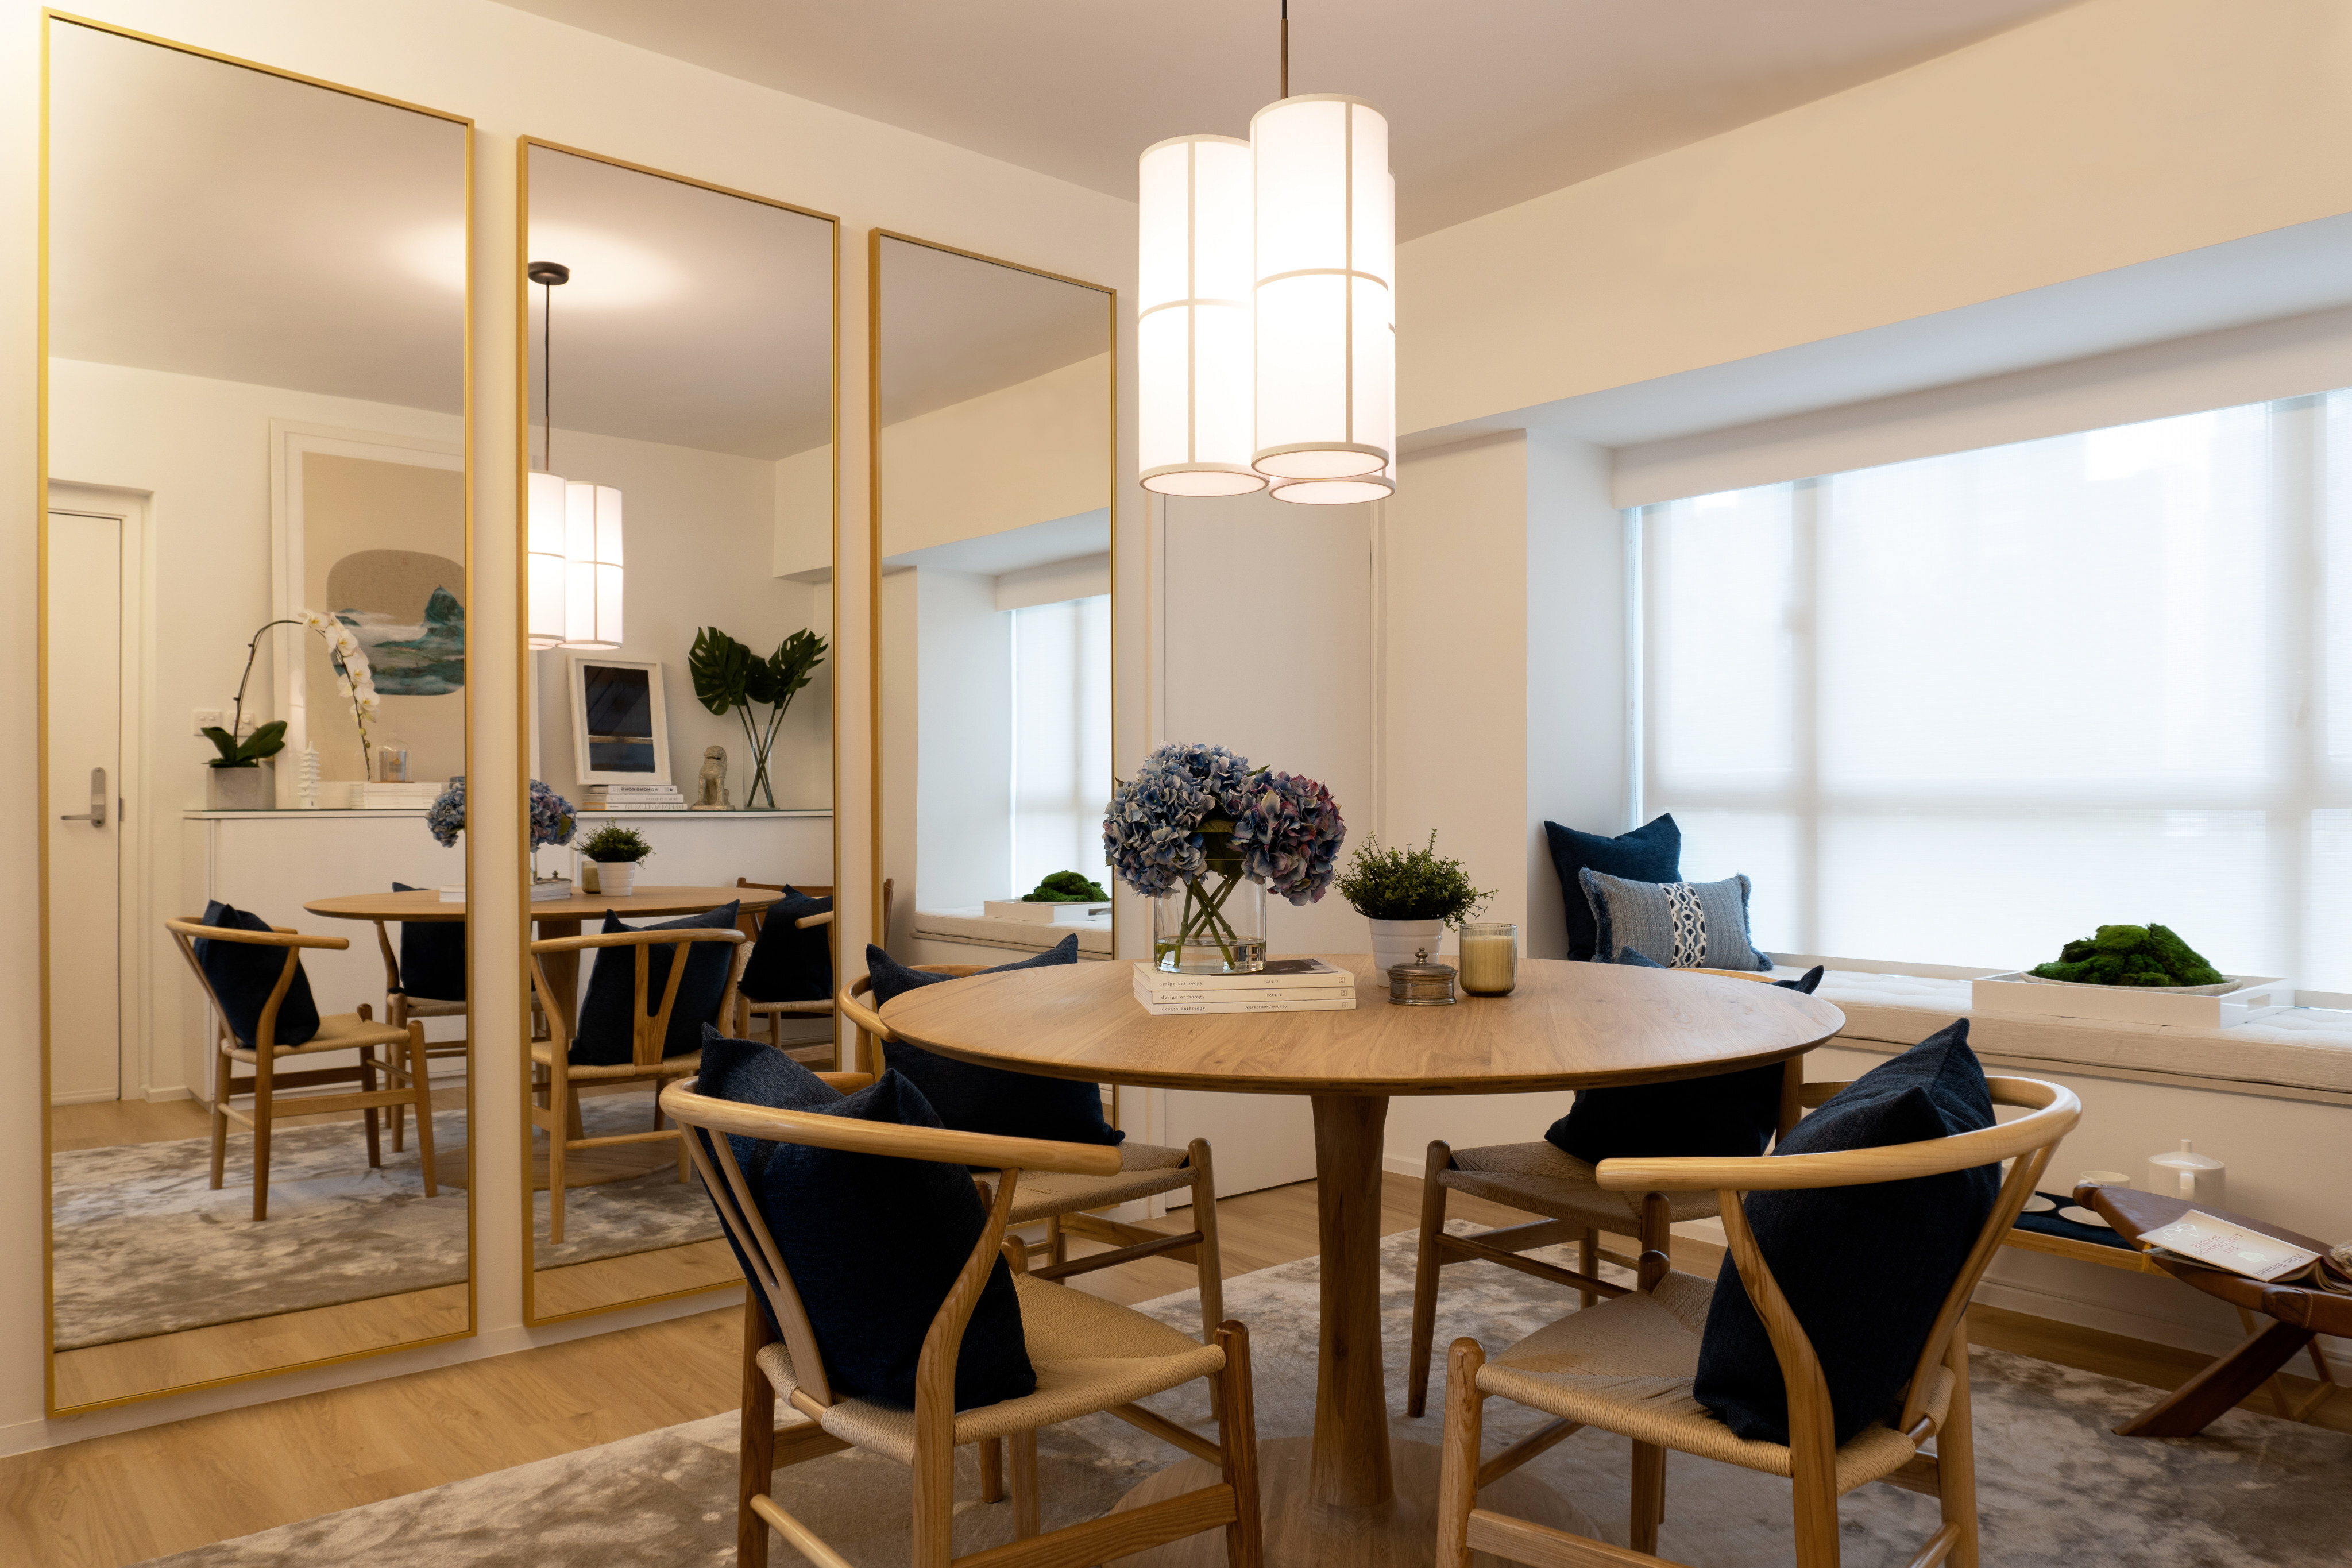 A first-time homeowner turned her small Hong Kong apartment into a cosy home with clever interior design tricks. Photo: Lydia Cheng